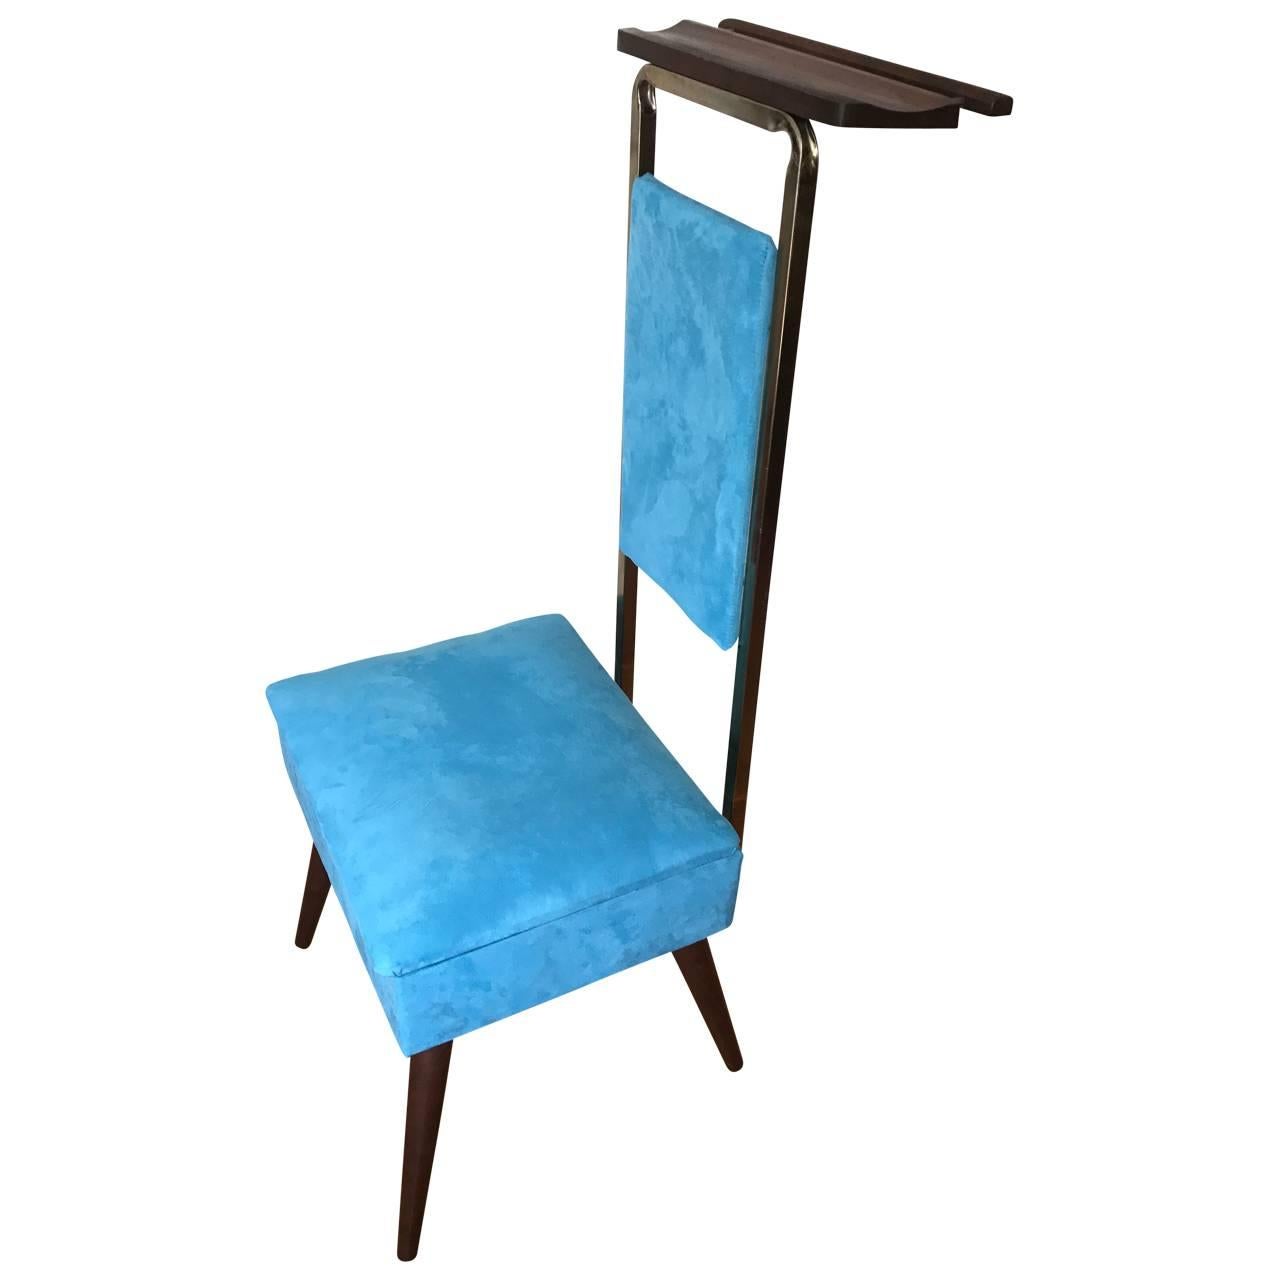 Suede Mid-Century Modern Valet Butlers Chair in Turquoise Fabric